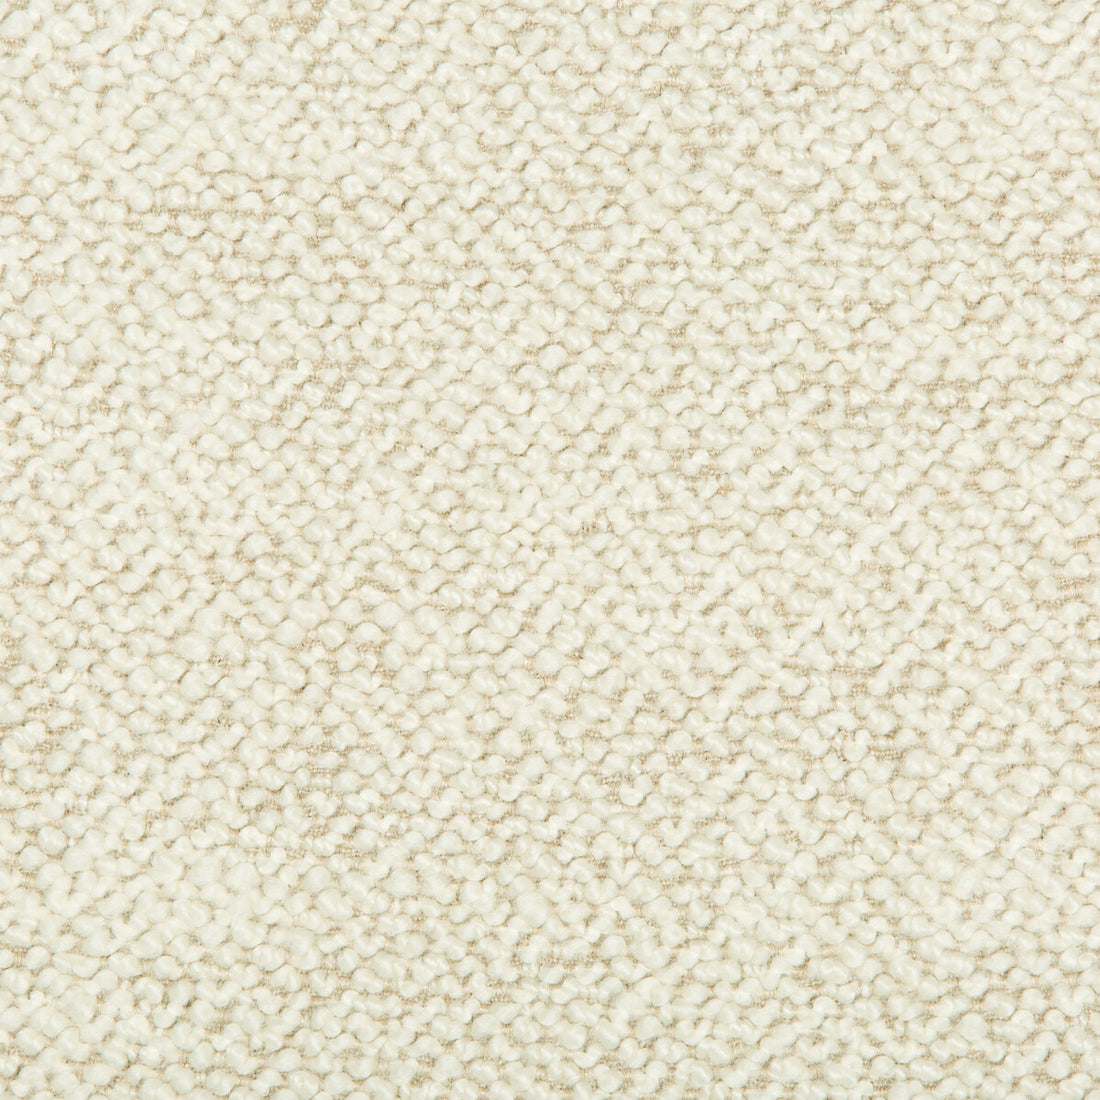 Babbit fabric in ecru color - pattern 34956.1.0 - by Kravet Couture in the Sue Firestone Malibu collection